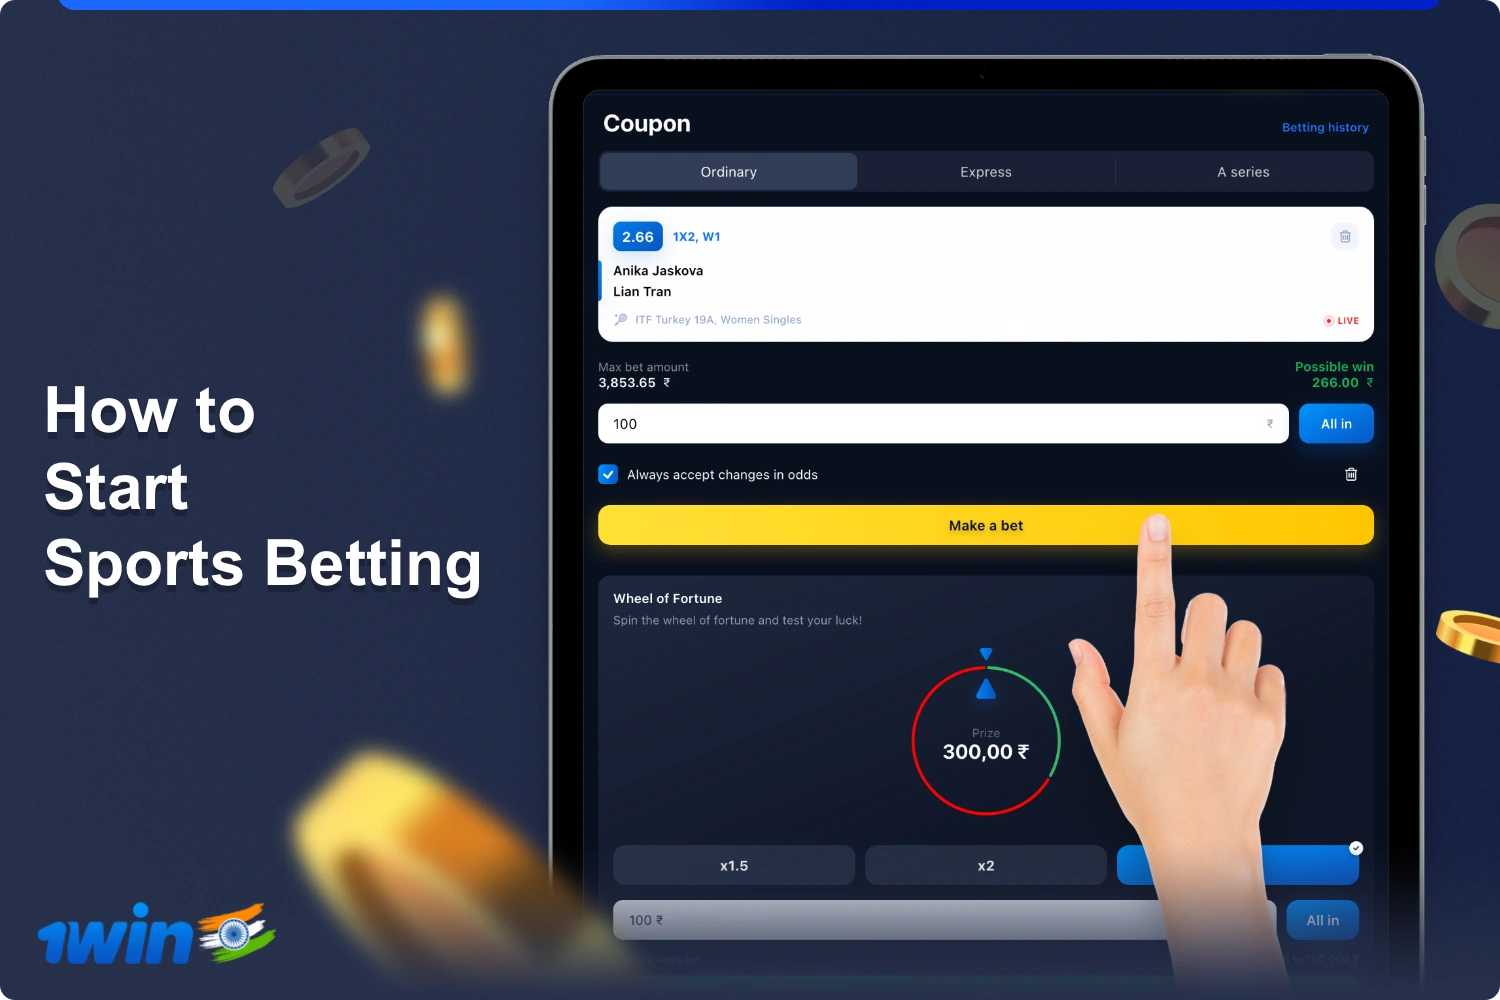 In order to start betting on sports at 1win you need to create an account and deposit